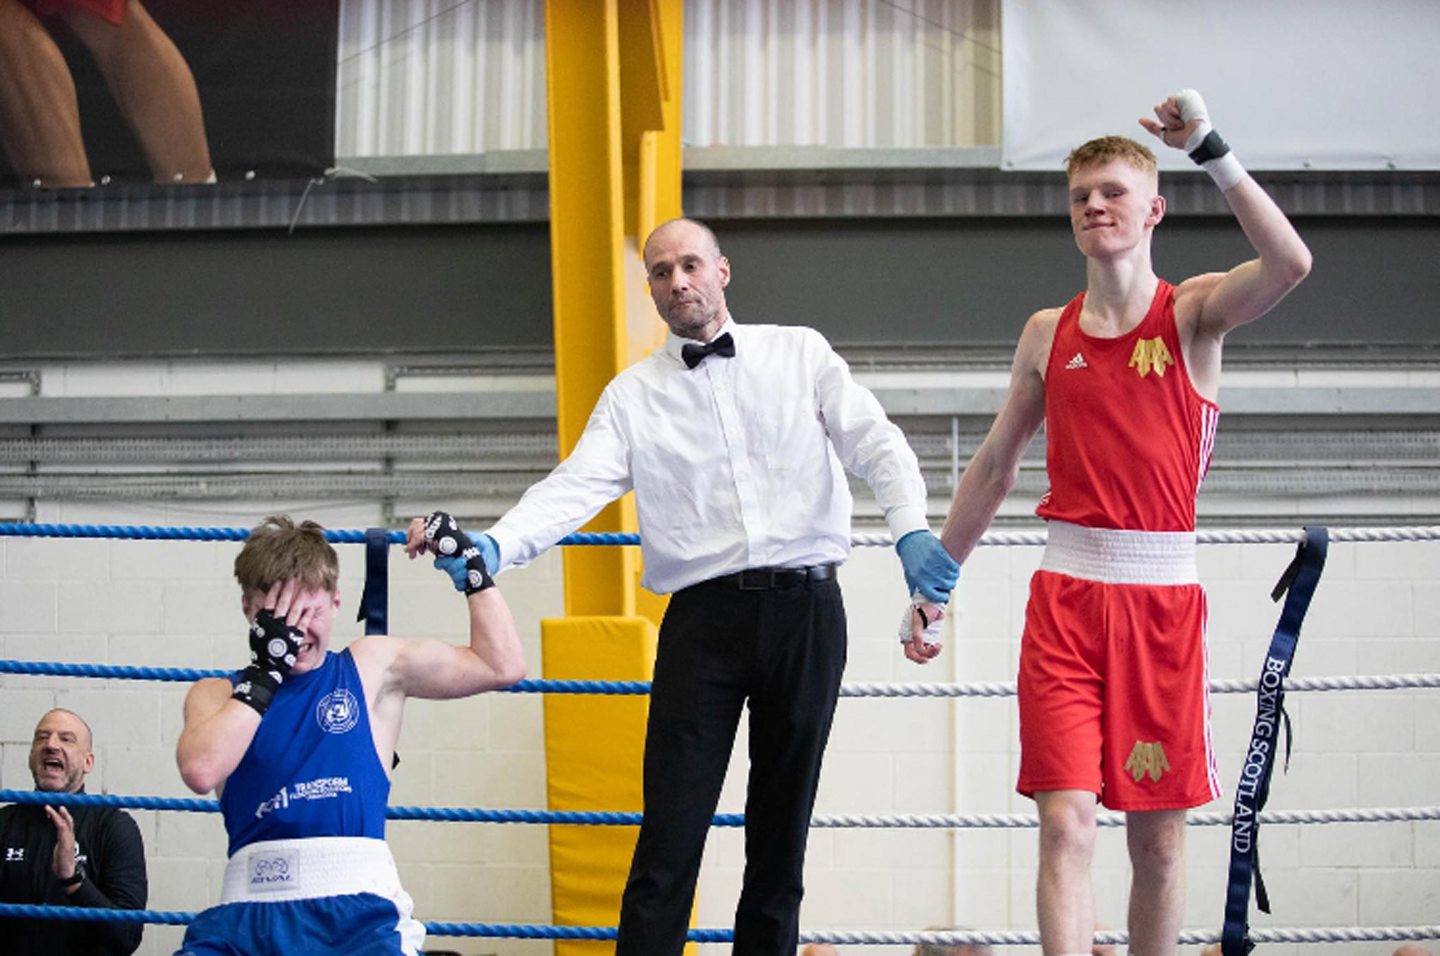  Granite City ABC boxer Kai Stitchell get the decision in the Golden Gloves final. Image: Boxing Scotland 